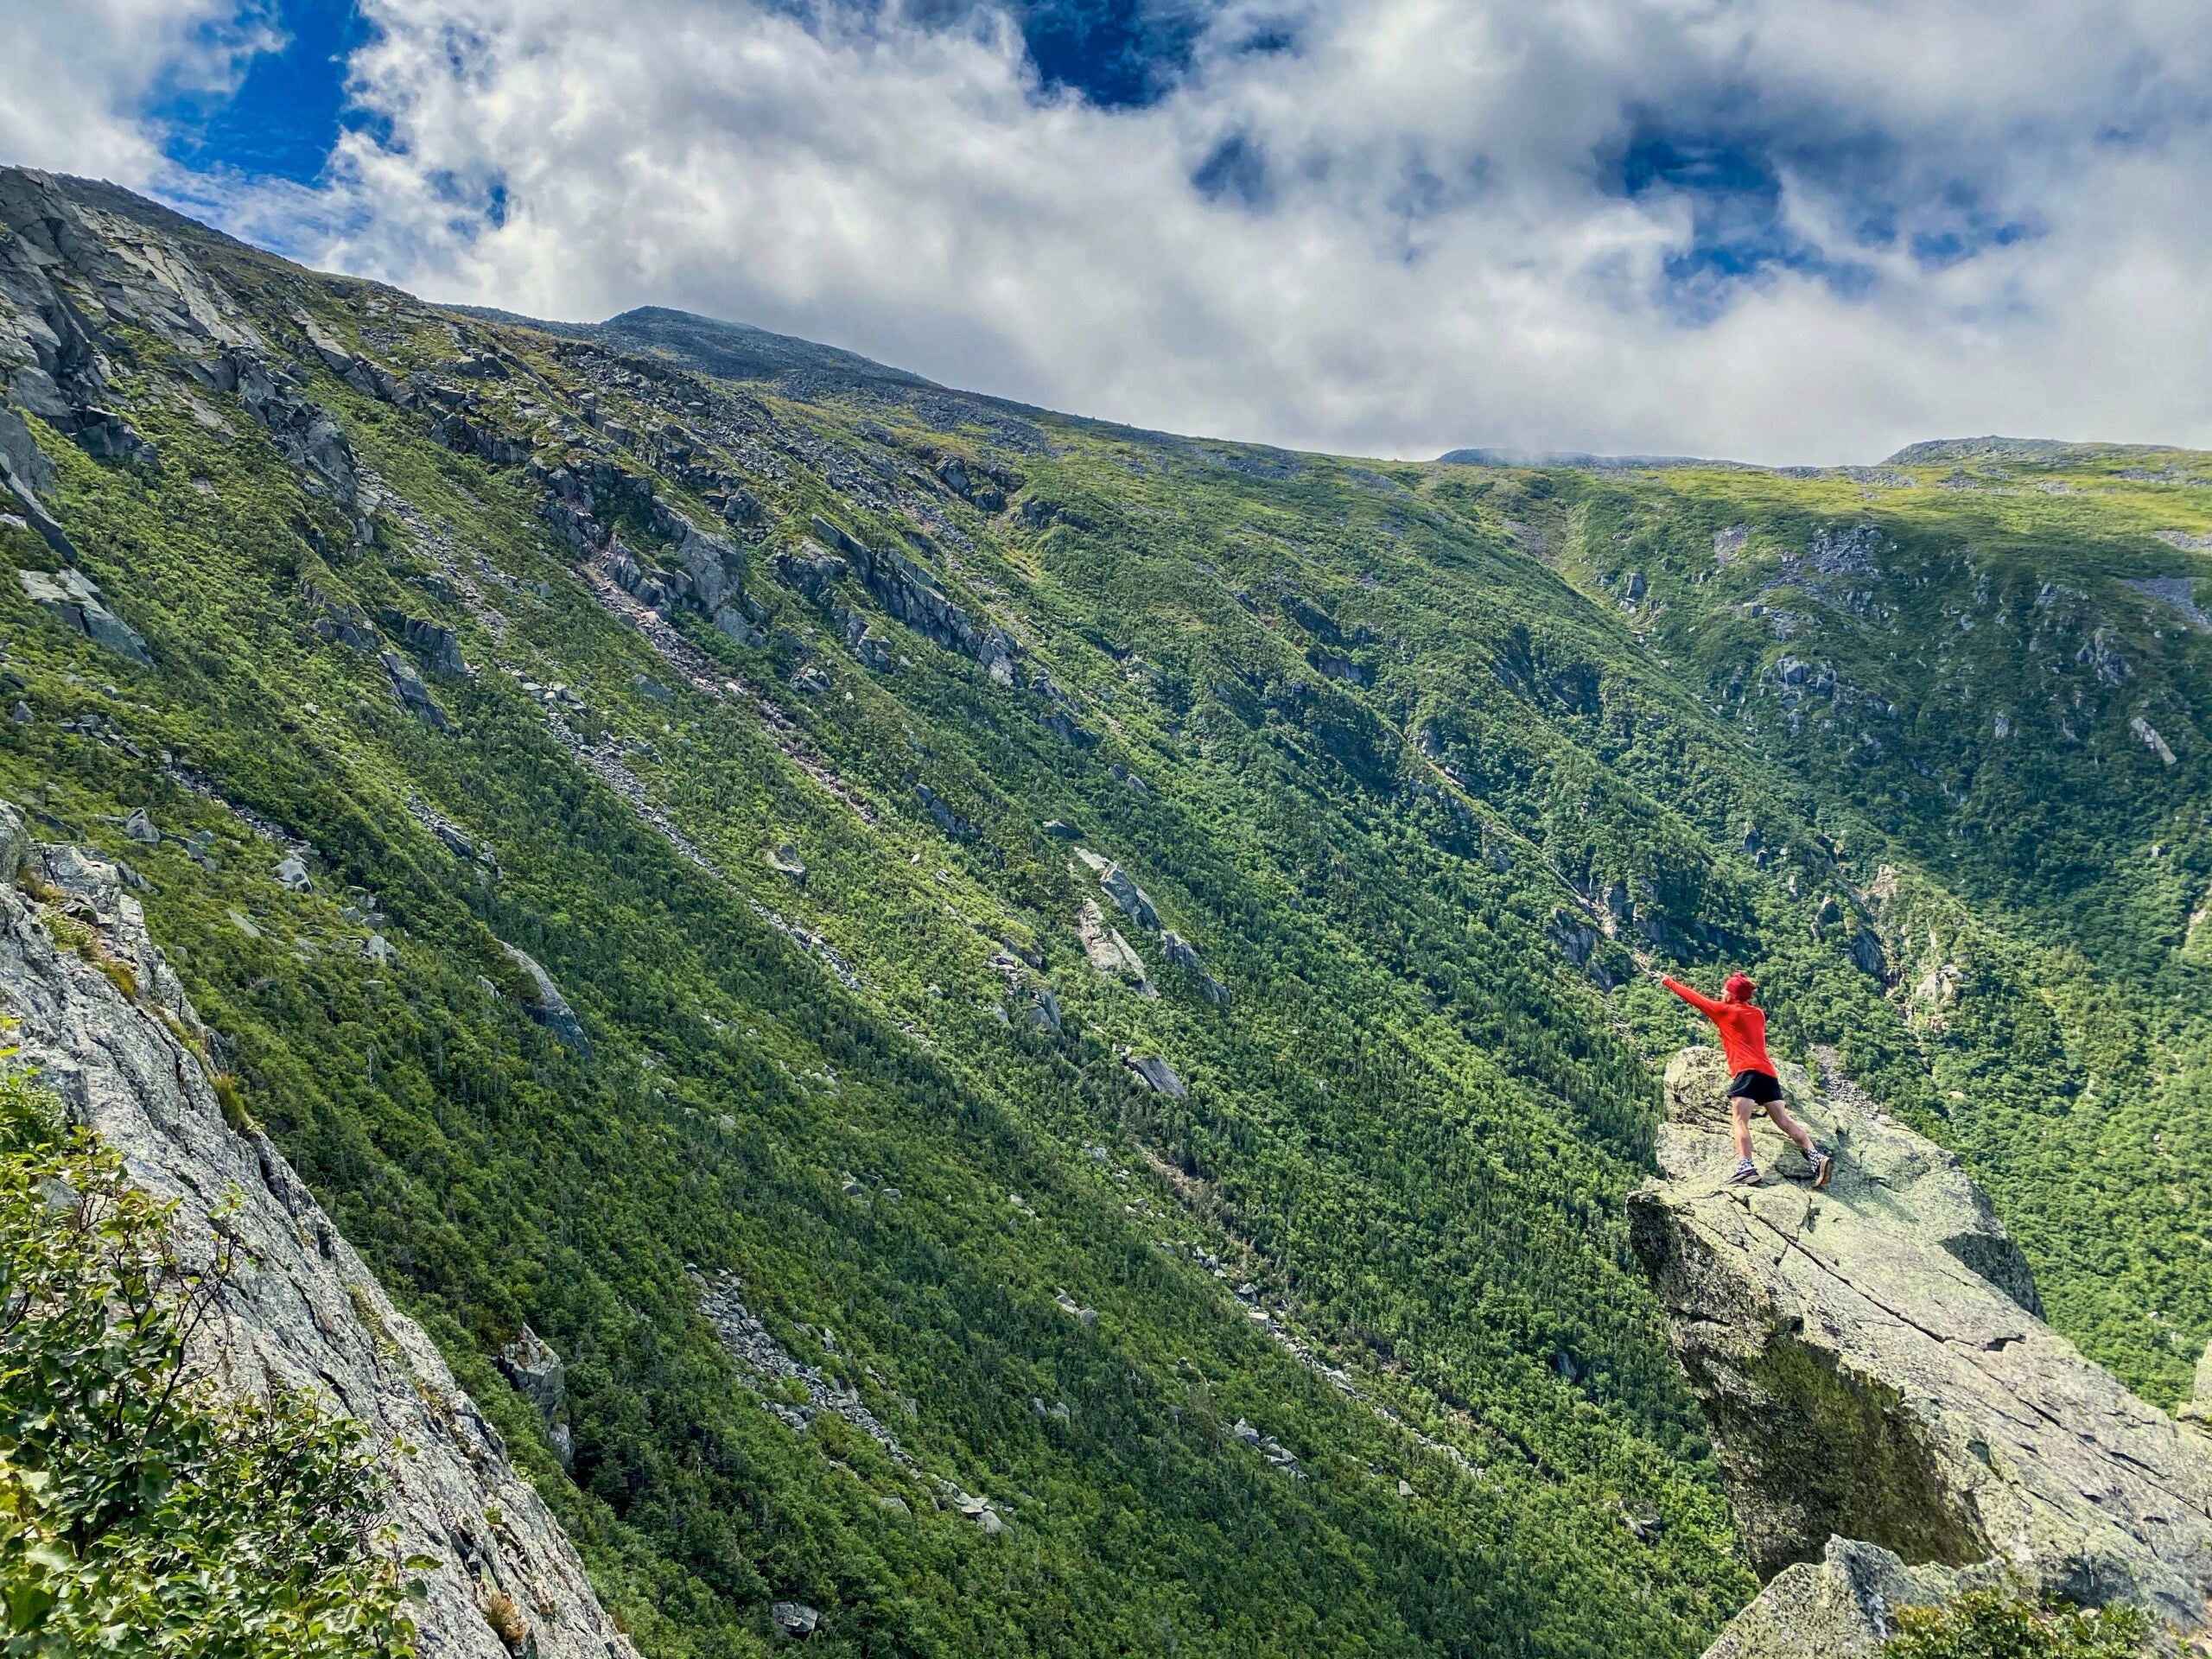 A hiker wearing a red hoodie stand on the edge of a cliff reaching out towards another mountain.